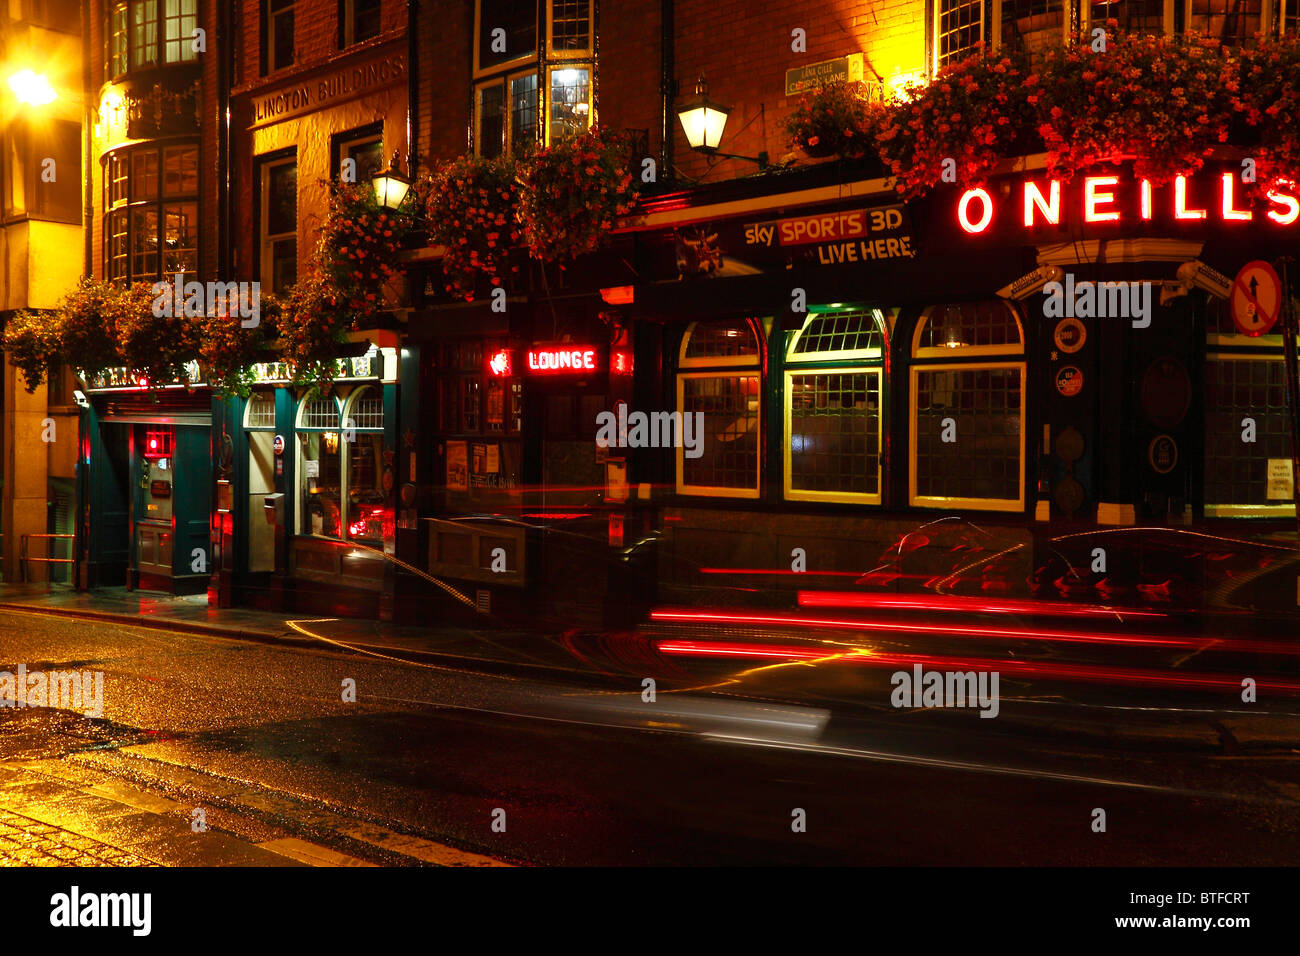 A nighttime view of the O'Neills Irish bar and restaurant, one of the famous Irish pubs in Dublin. Stock Photo